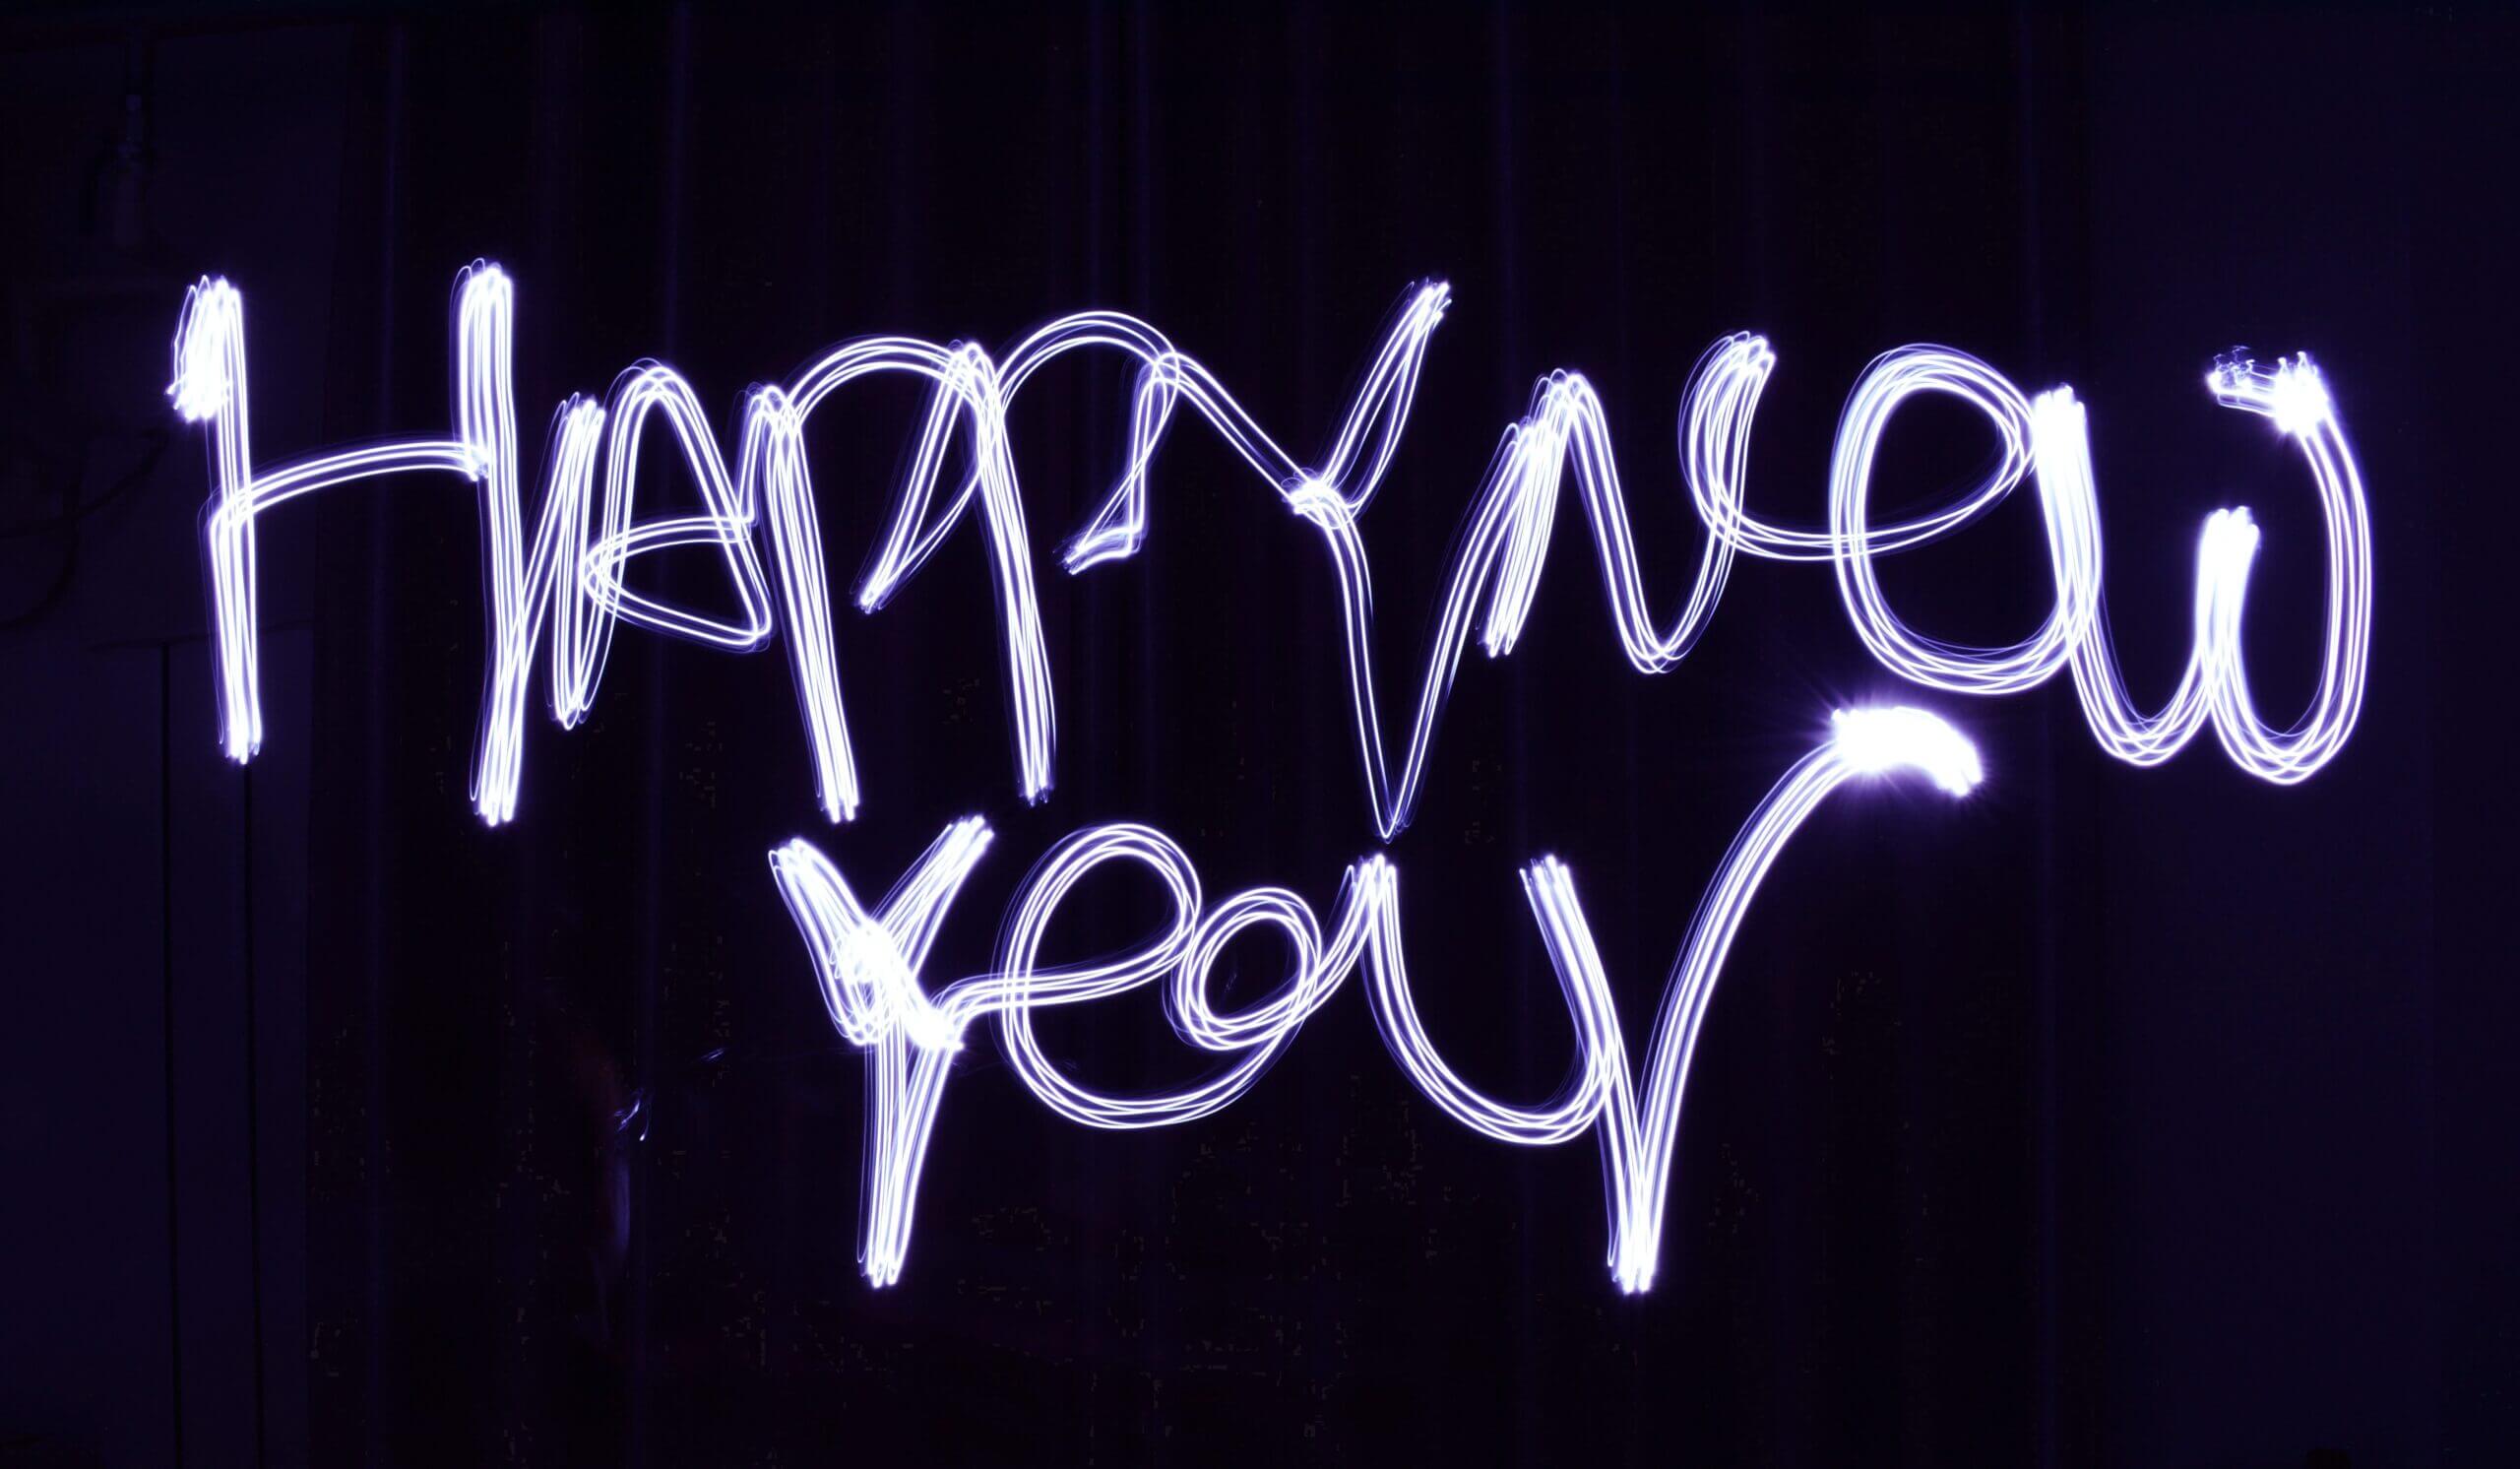 Light art spelling out "Happy New Year" in white on a dark background